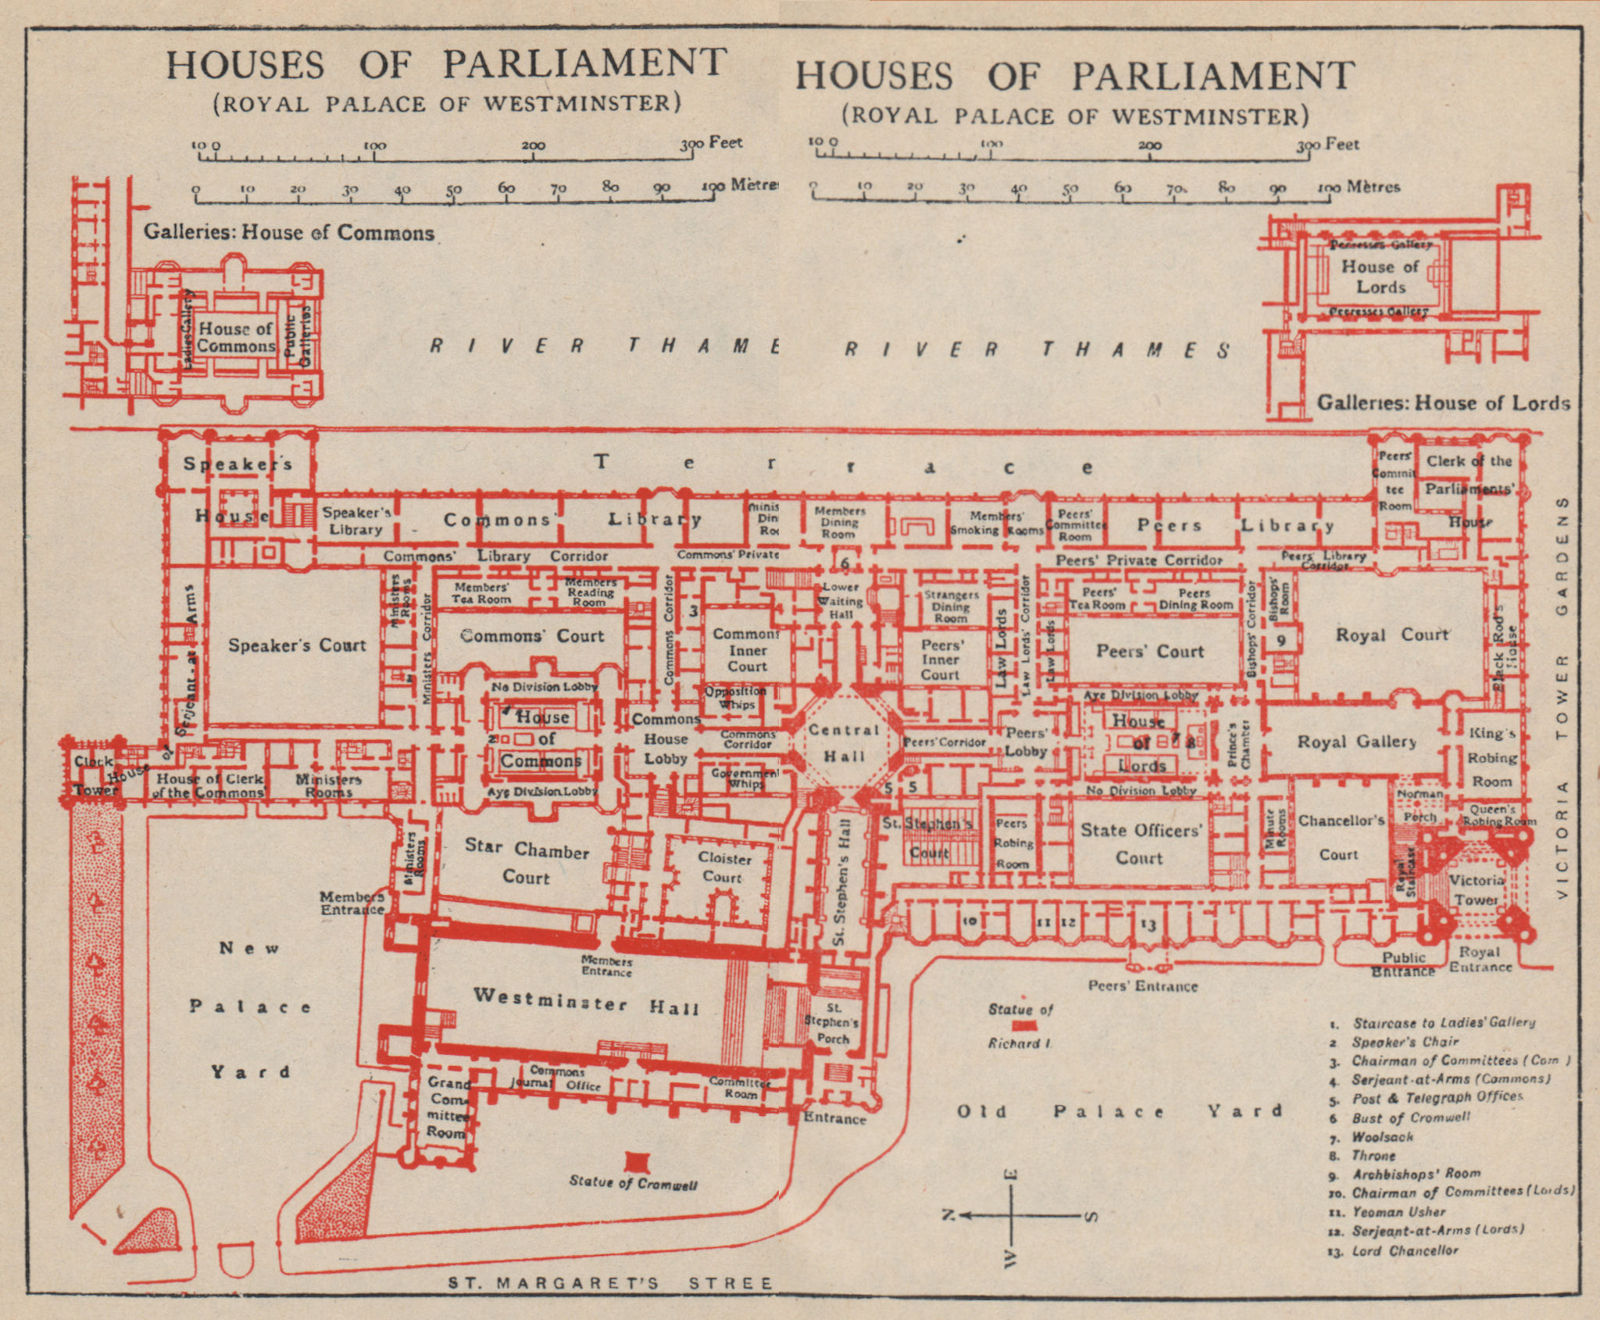 HOUSES OF PARLIAMENT. PALACE OF WESTMINSTER. Vintage floor plan. London 1951 map